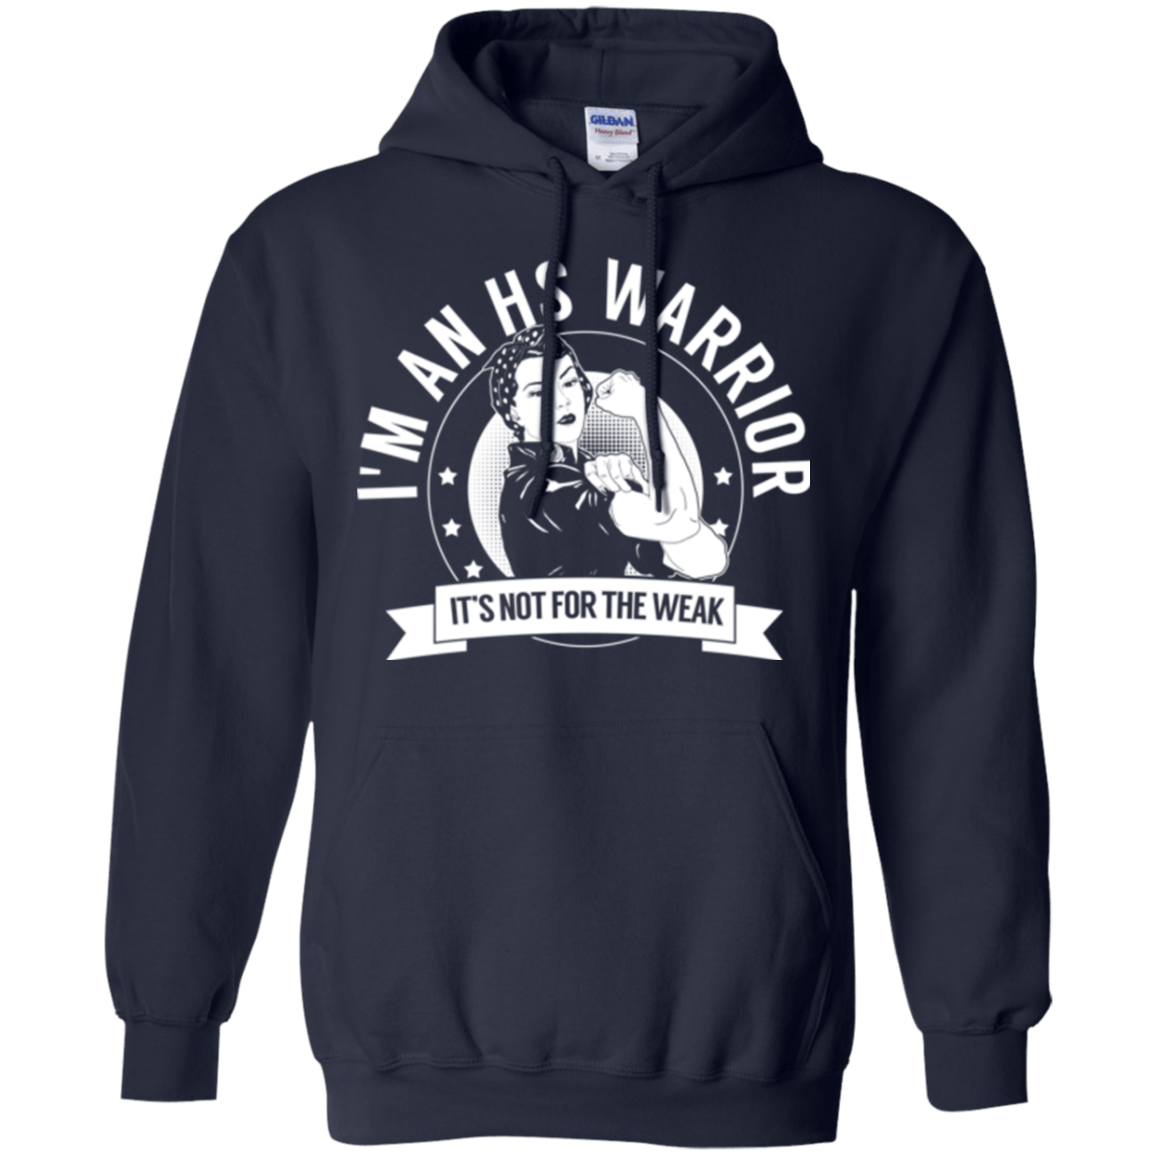 Hidradenitis Suppurativa - HS Warrior Not For The Weak Pullover Hoodie 8 oz. - The Unchargeables